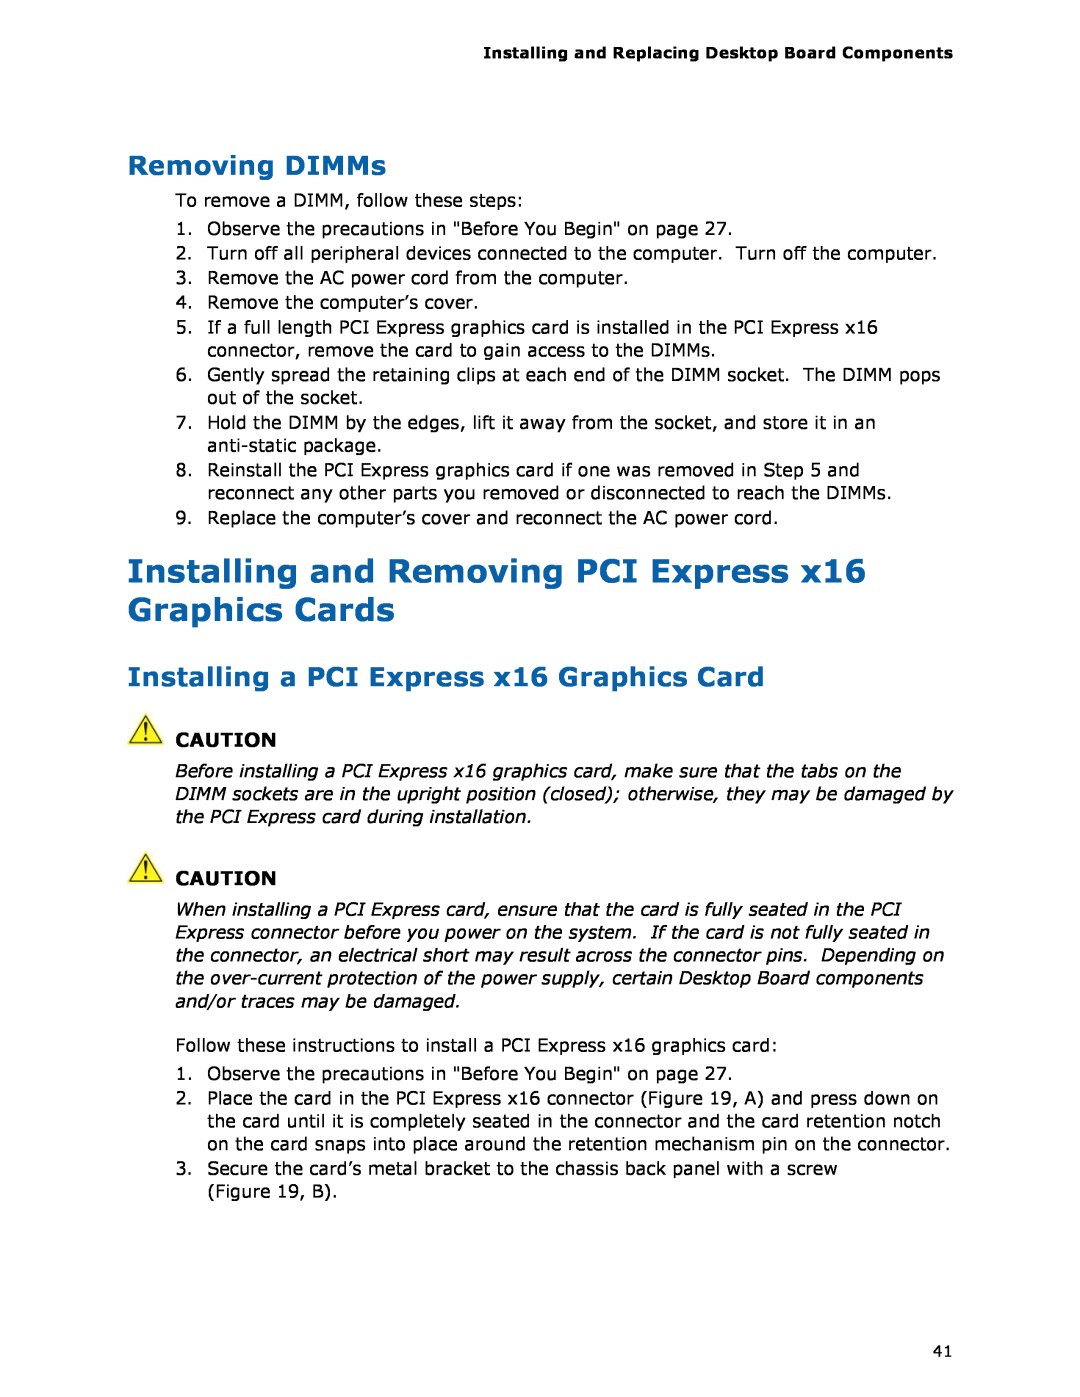 Intel BOXDH55HC manual Installing and Removing PCI Express x16 Graphics Cards, Removing DIMMs 